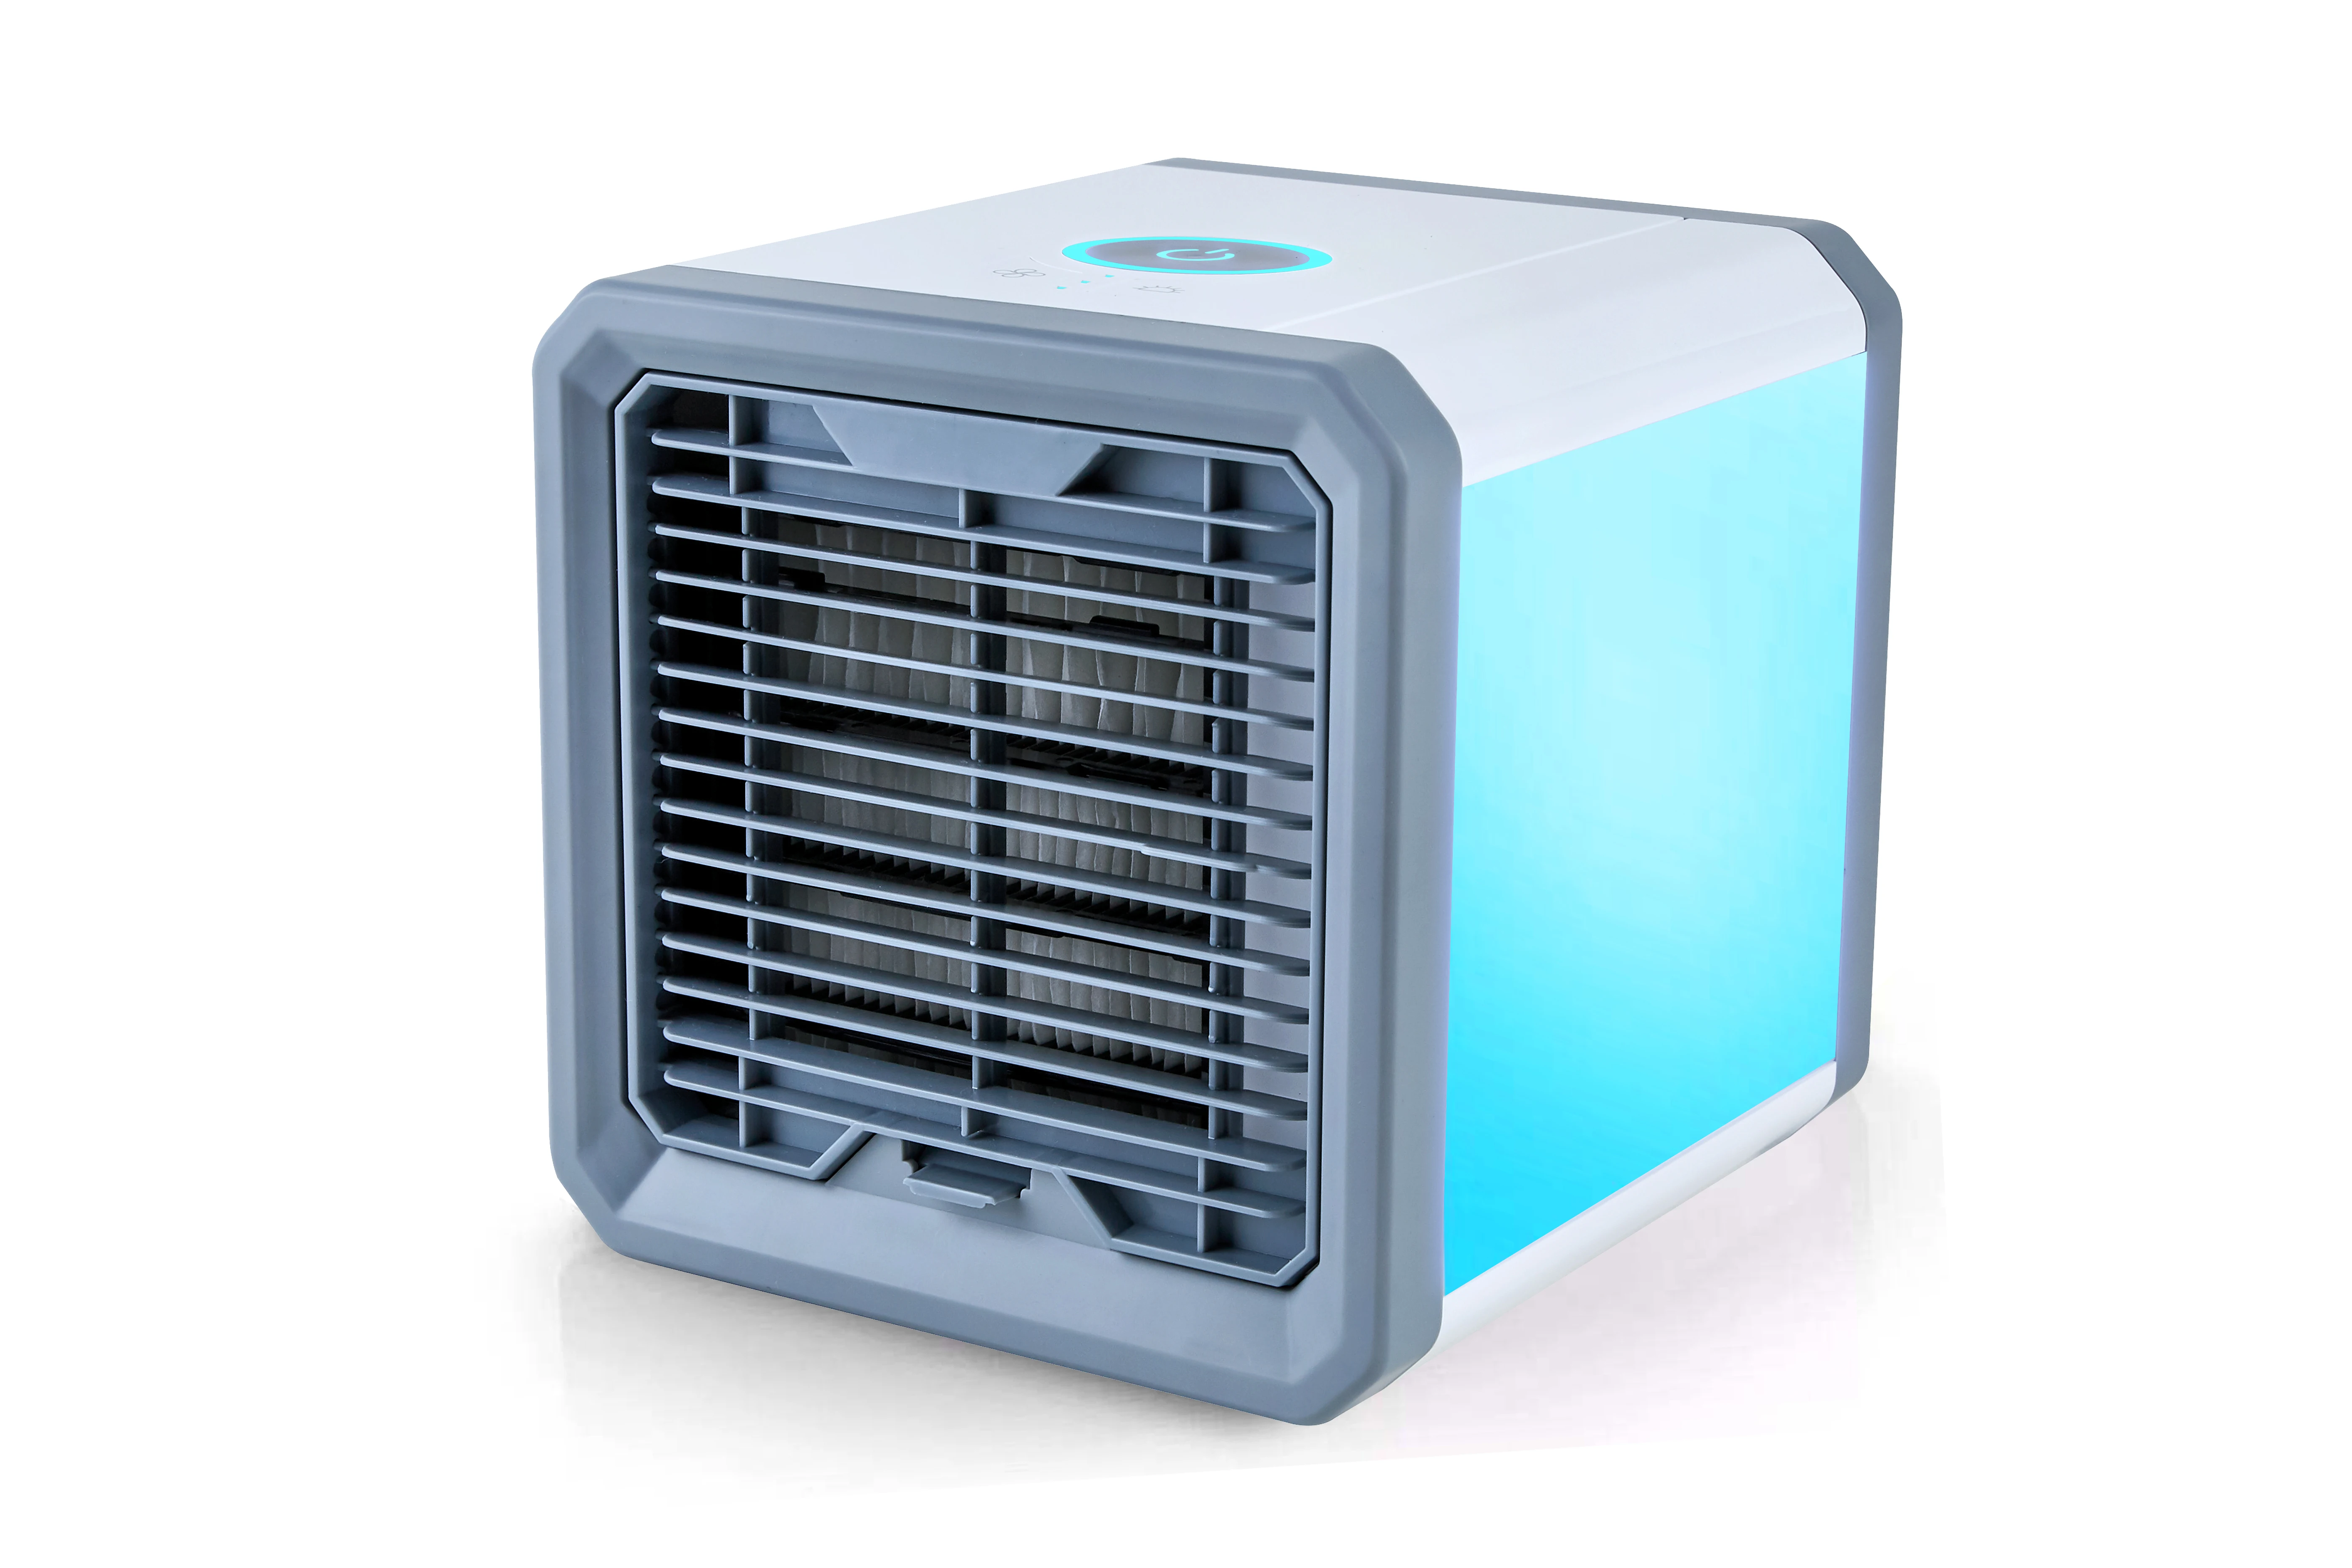 
Arctic Air Personal Space Mini Cooler with combined Function of Cooler /Conditioner Free Samples 